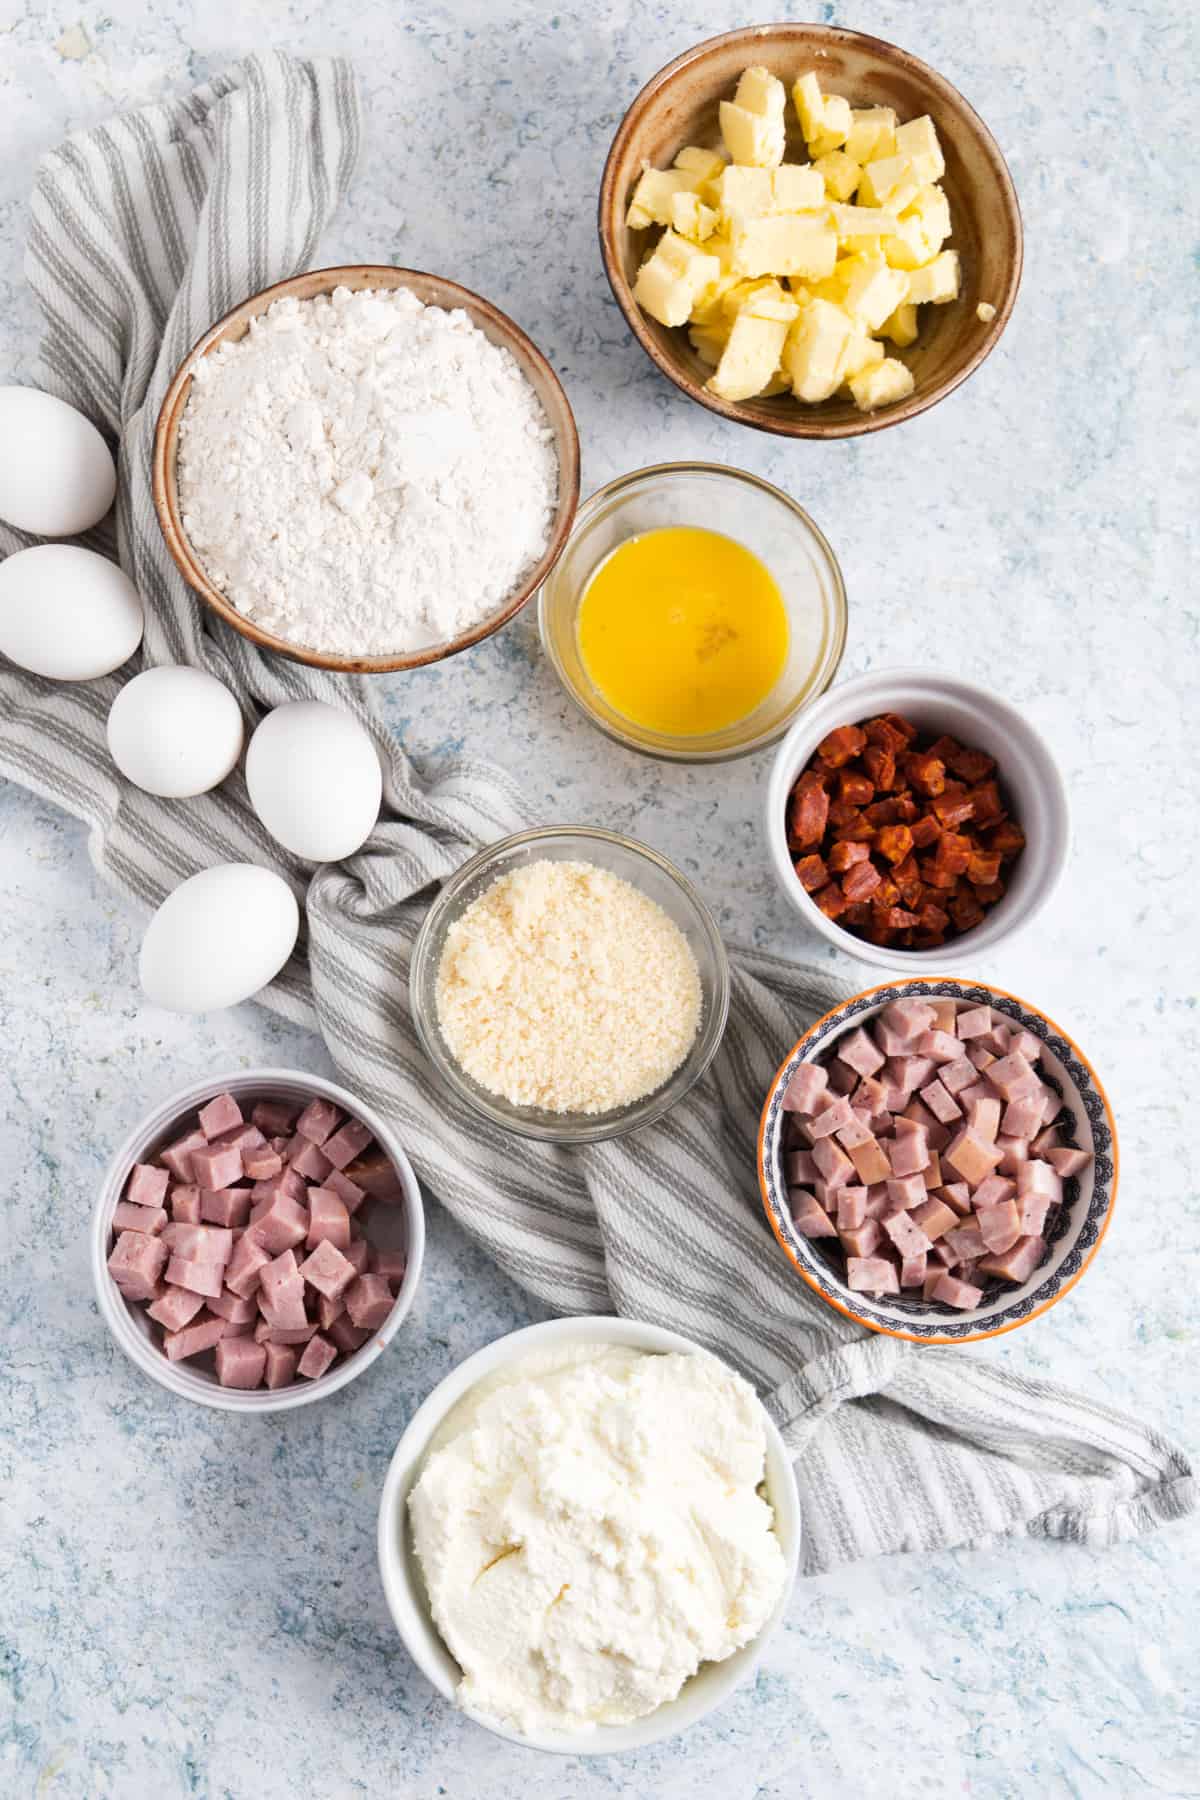 All the ingredients needed to make an Italian Easter pie: eggs, flour, butter, parmesan, ricotta, ham, sausage, chorizo.